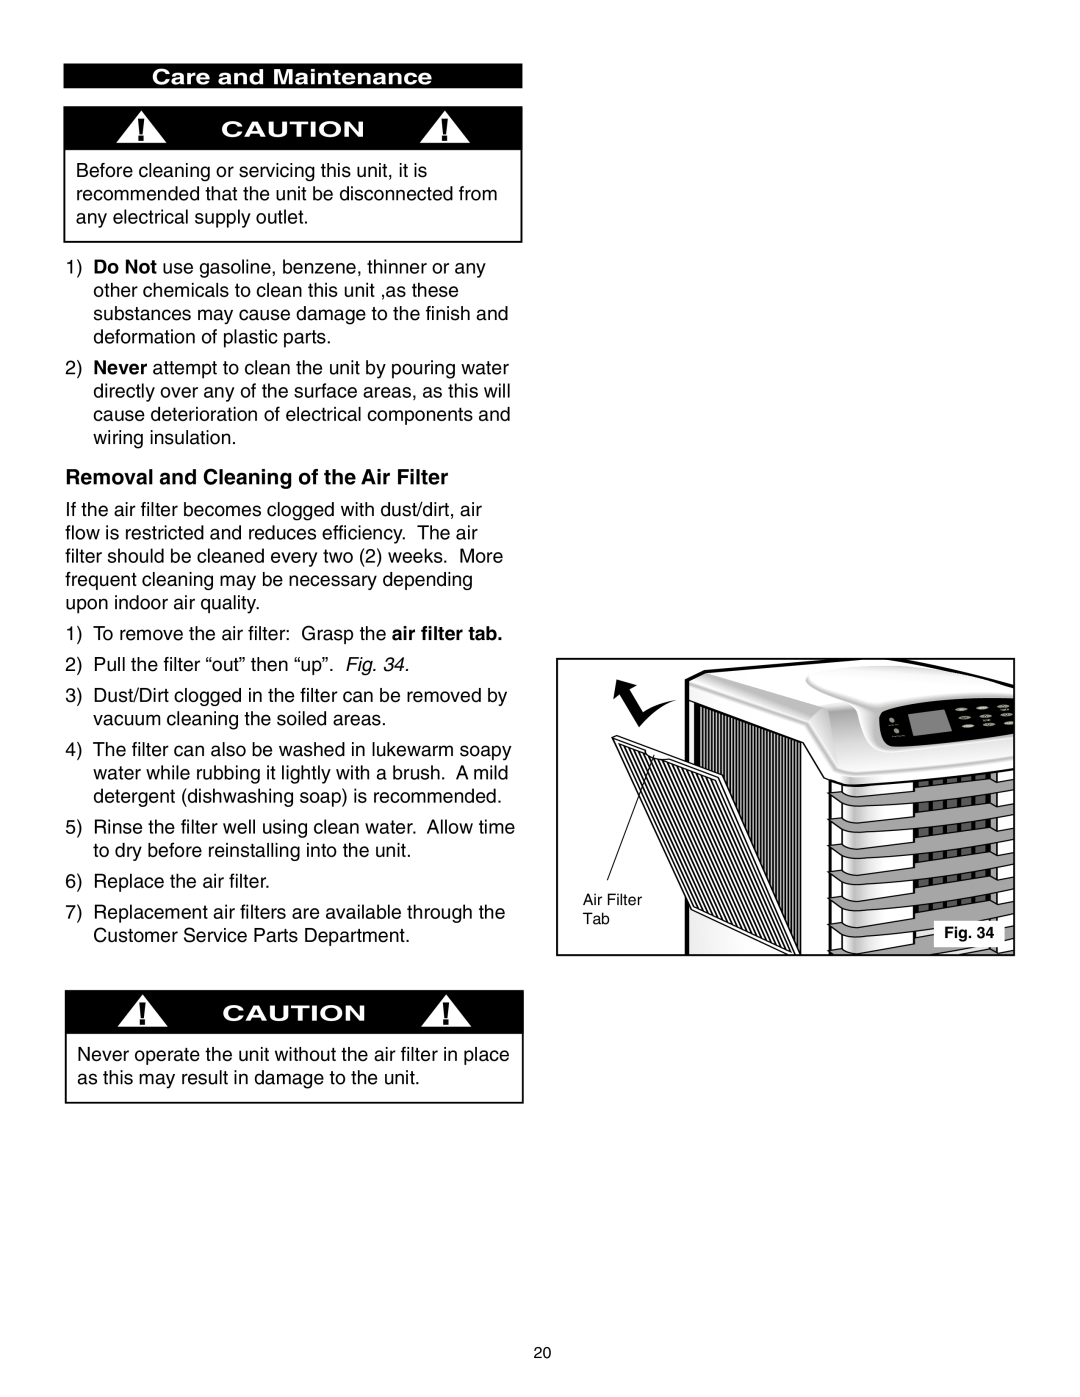 Danby SPAC8499 manual Care and Maintenance, Removal and Cleaning of the Air Filter 